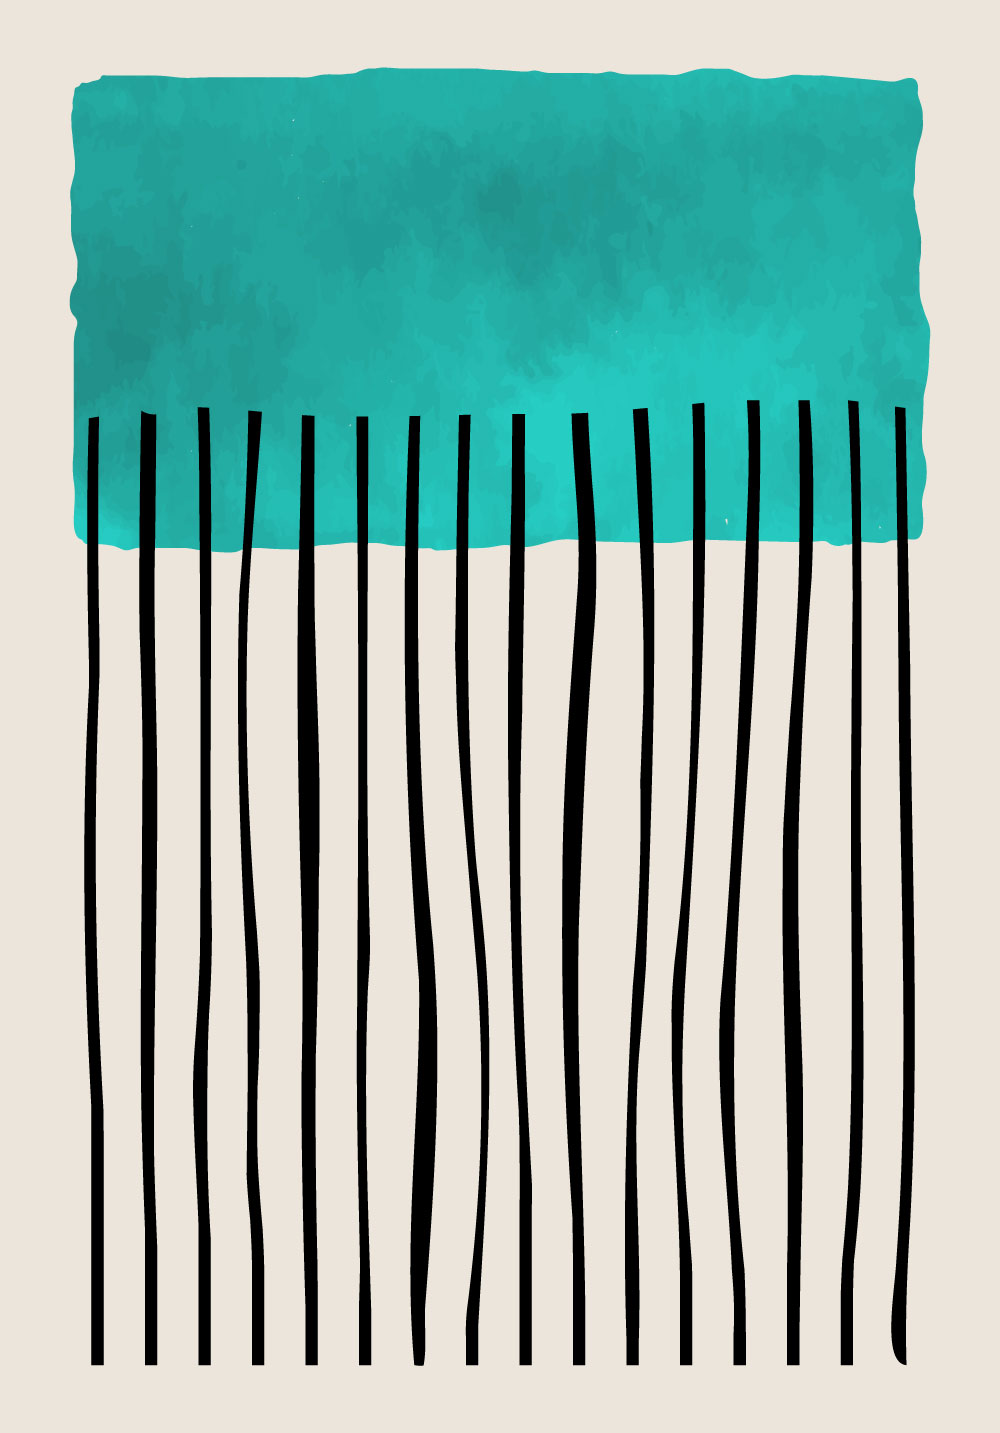 Abstract teal rectangle